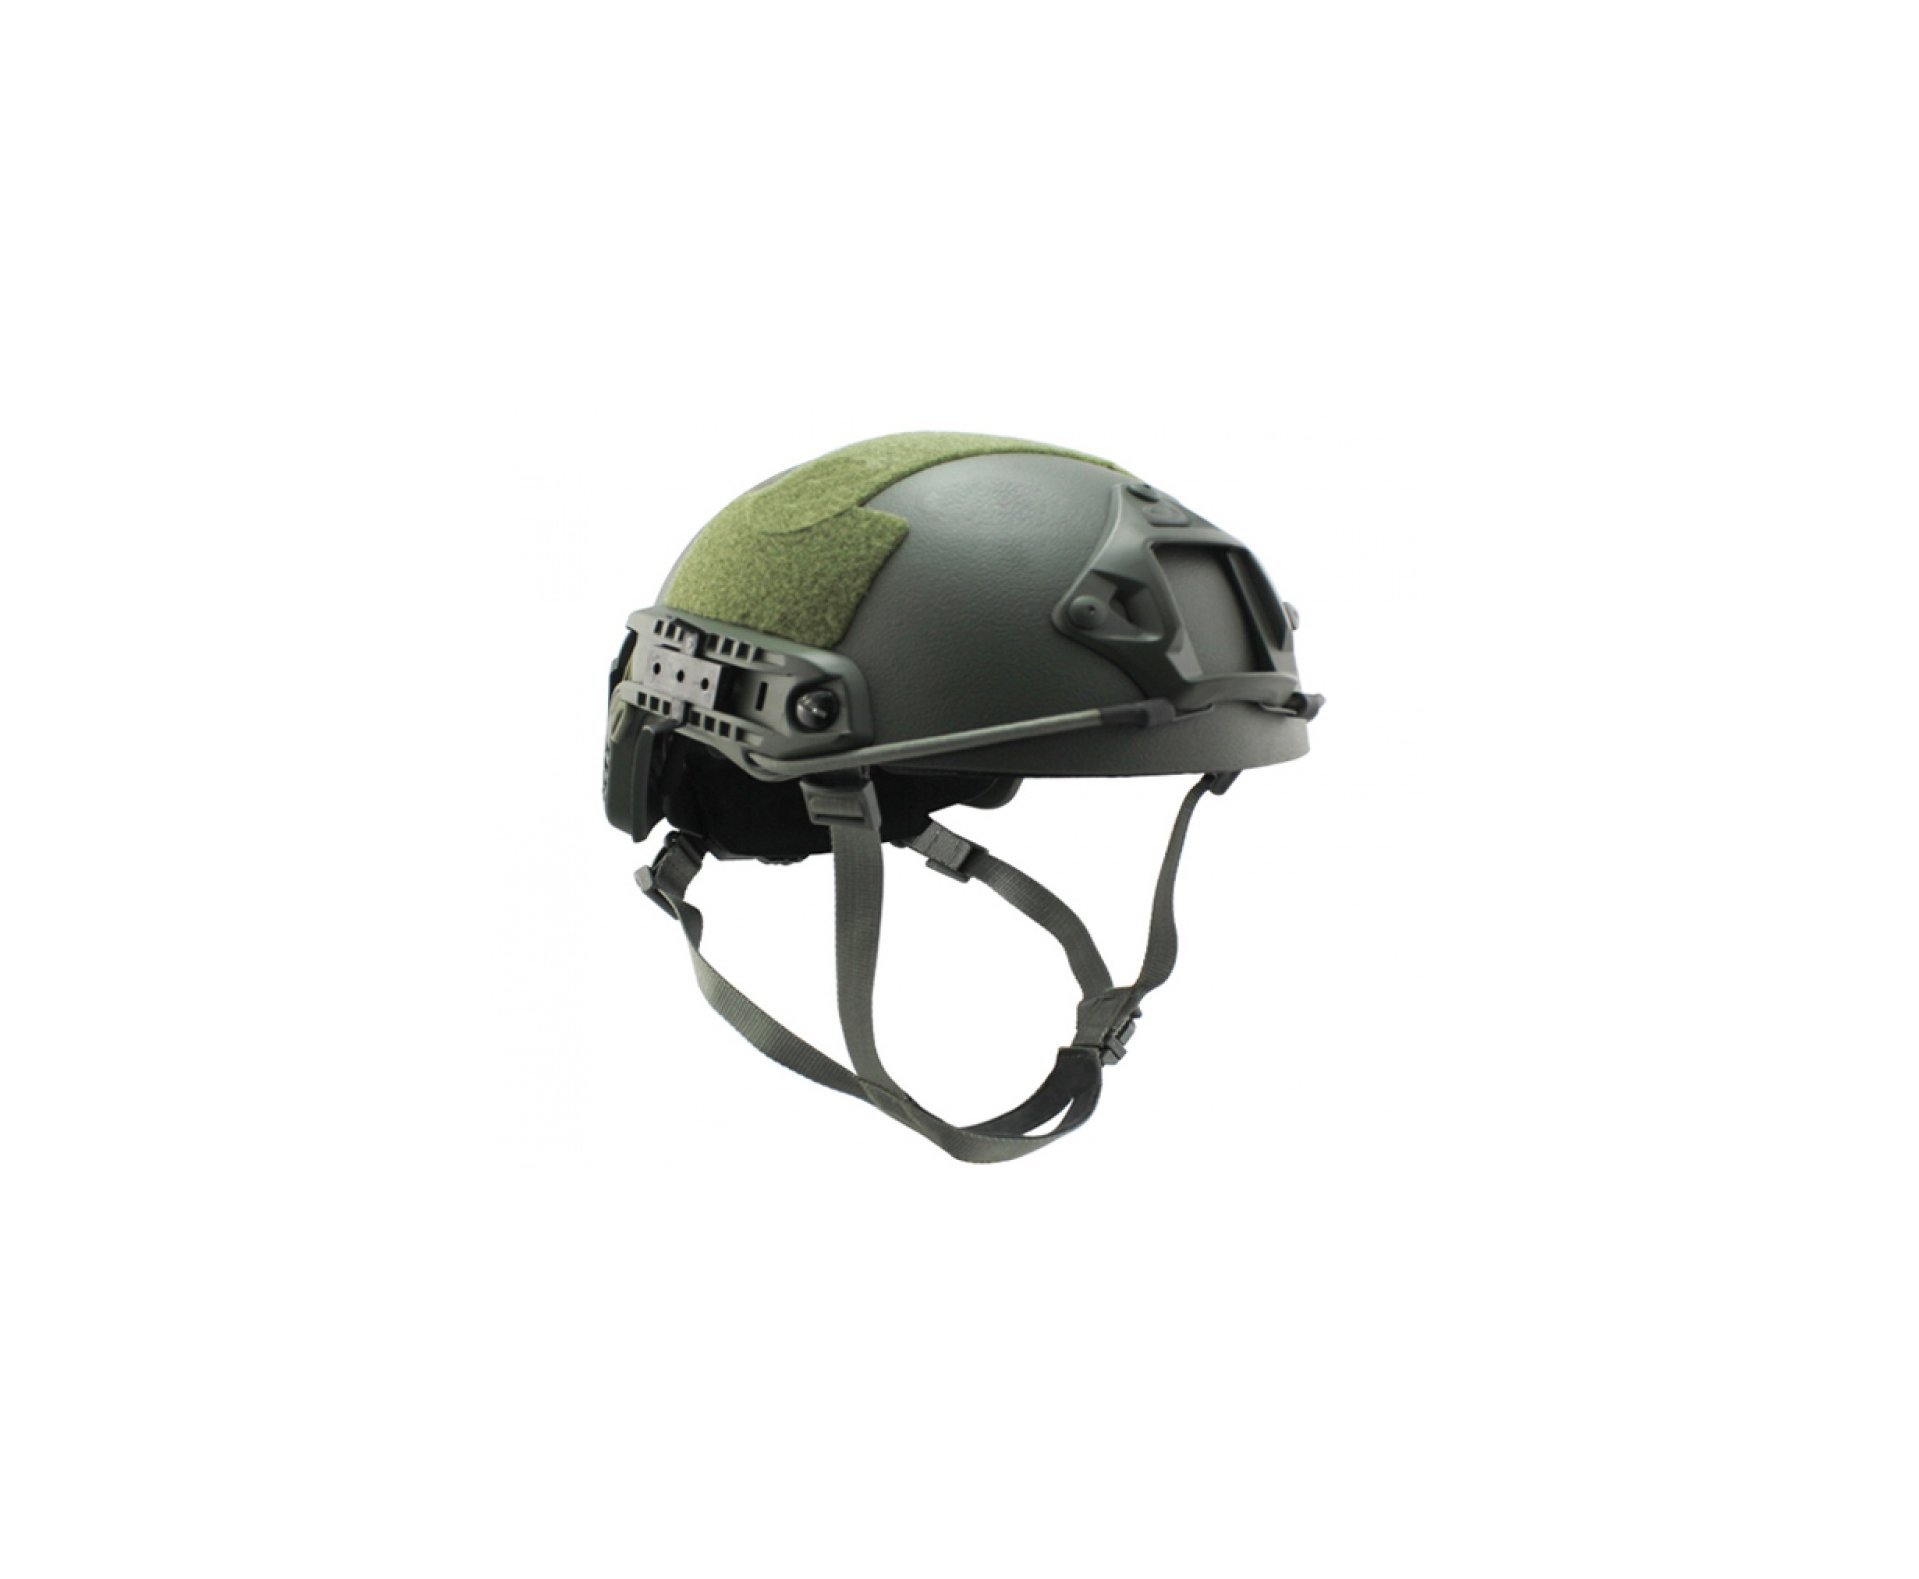 Capacete Tático Para Airsoft/paintball Mod Fast B Verde Oliva